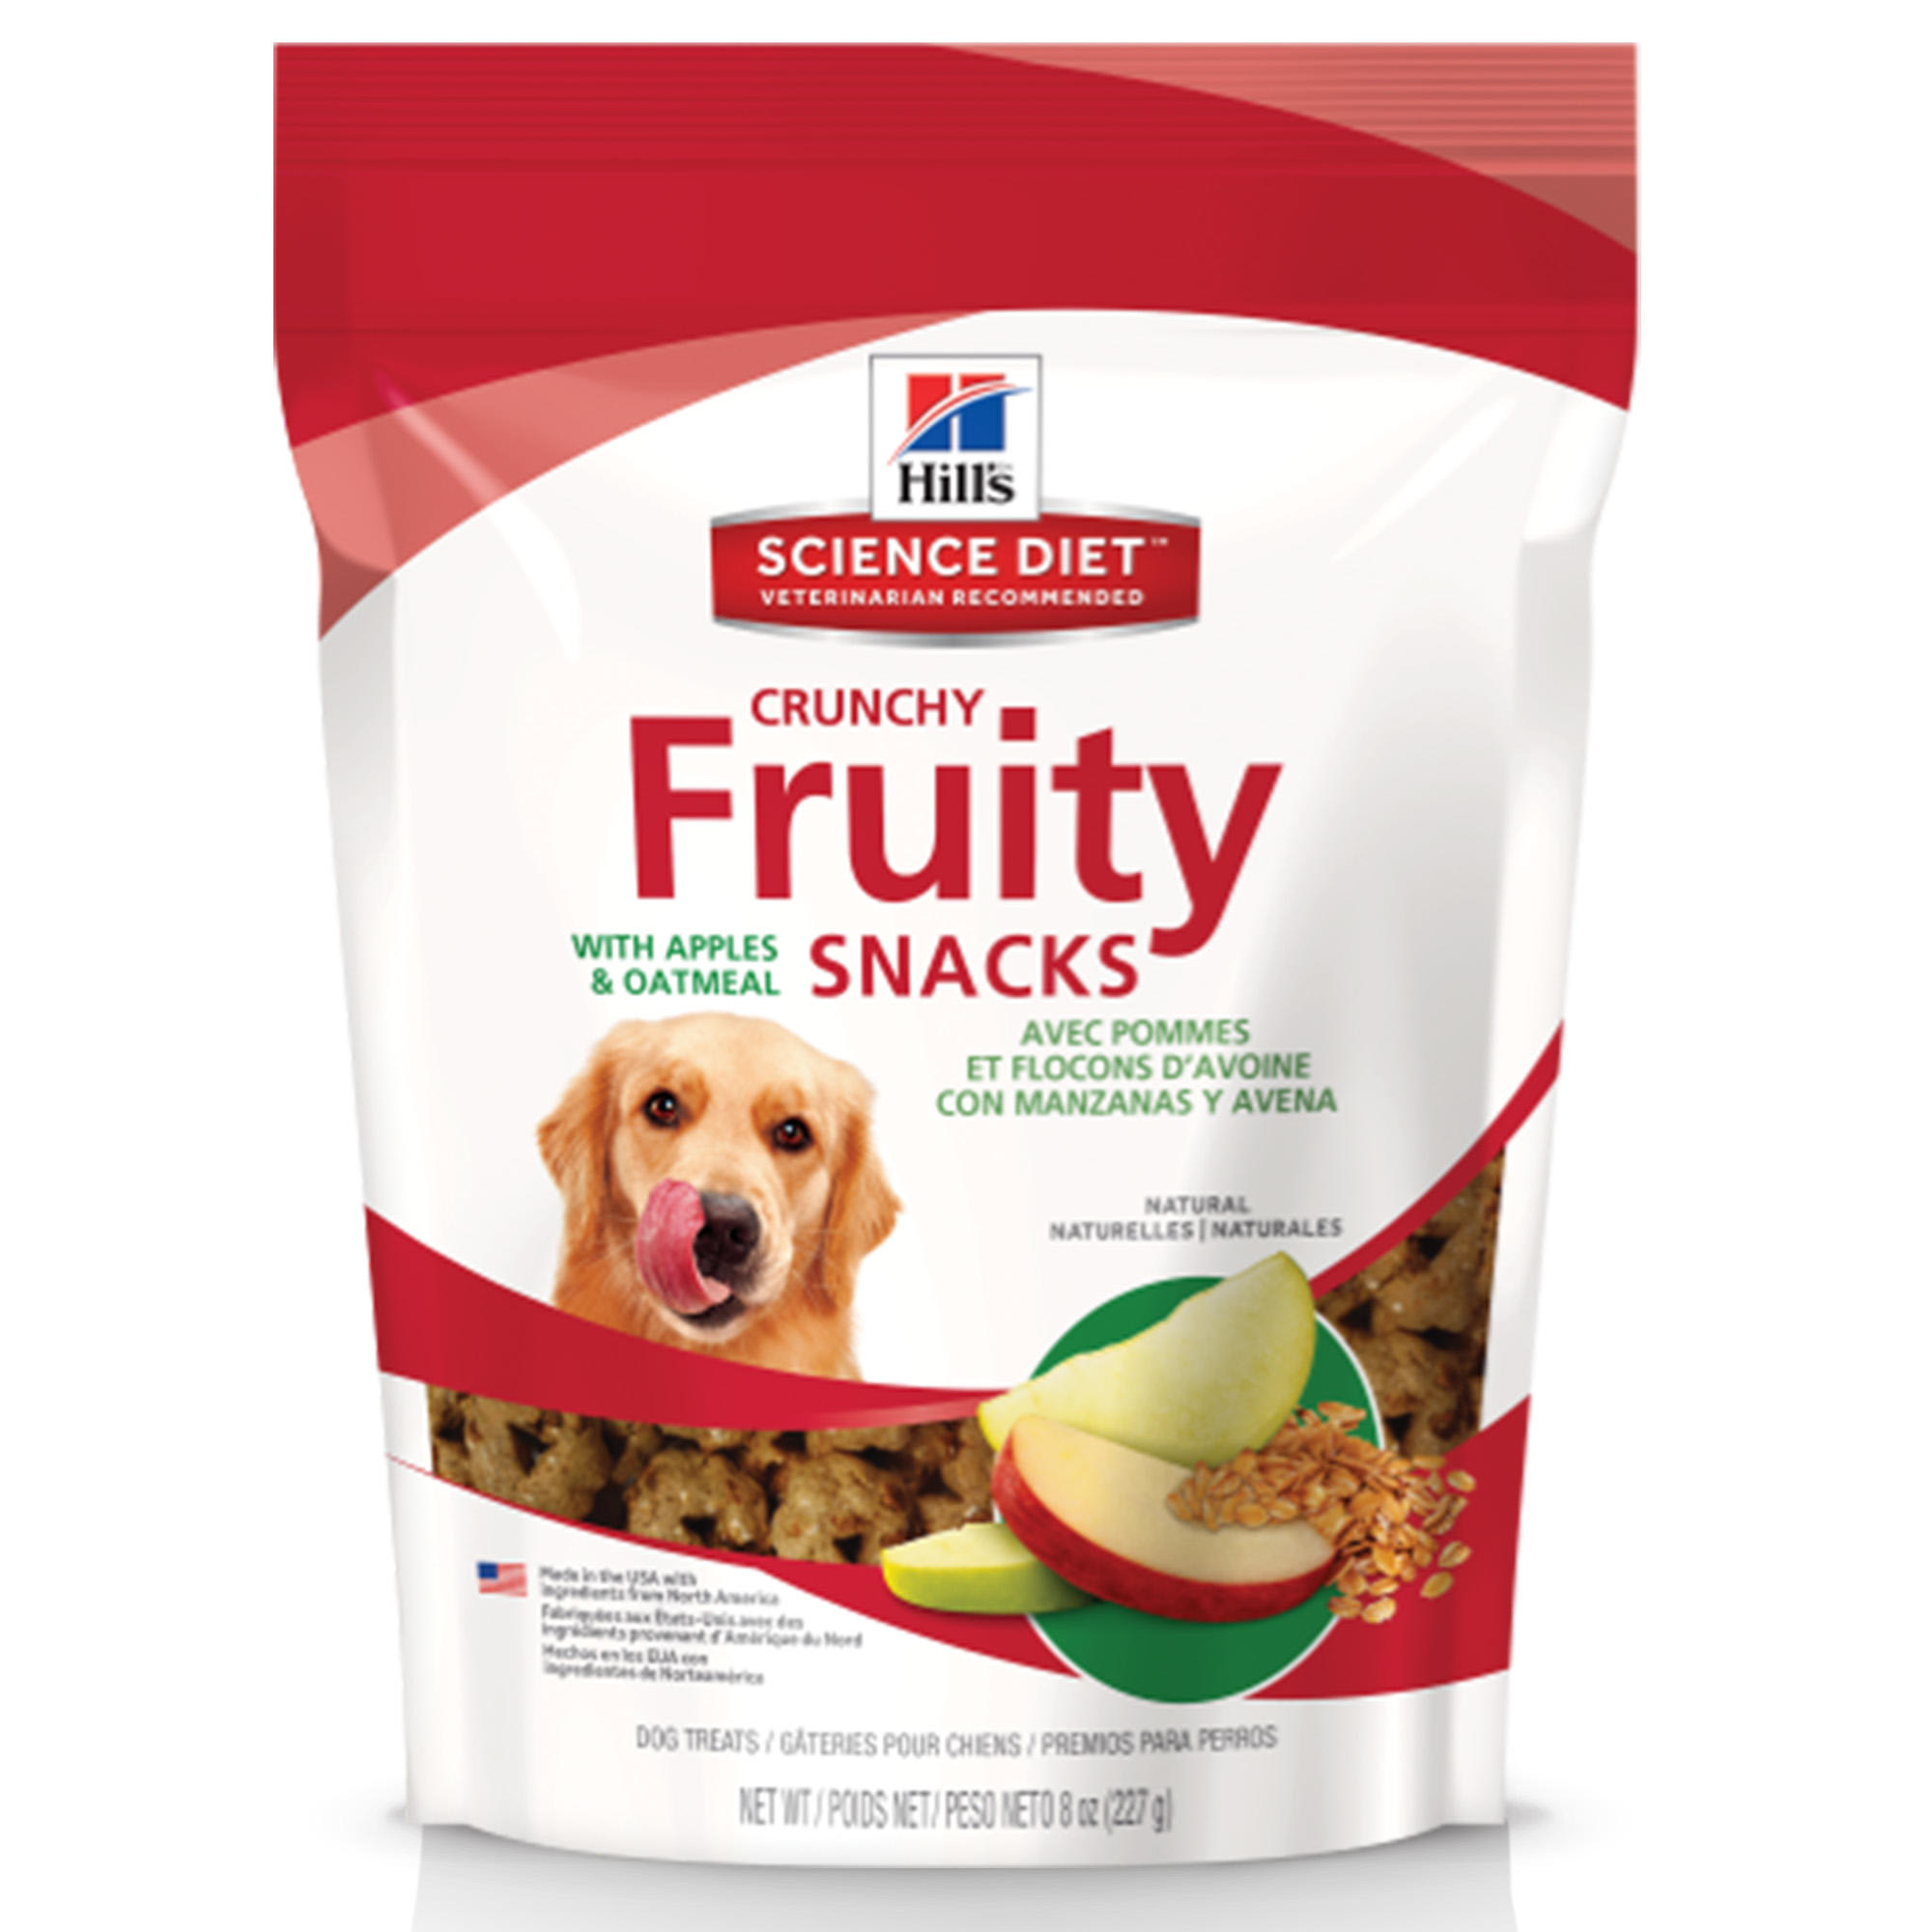 Natural Pet Food, Treats, Toys, Supplements, and Supplies for Dogs